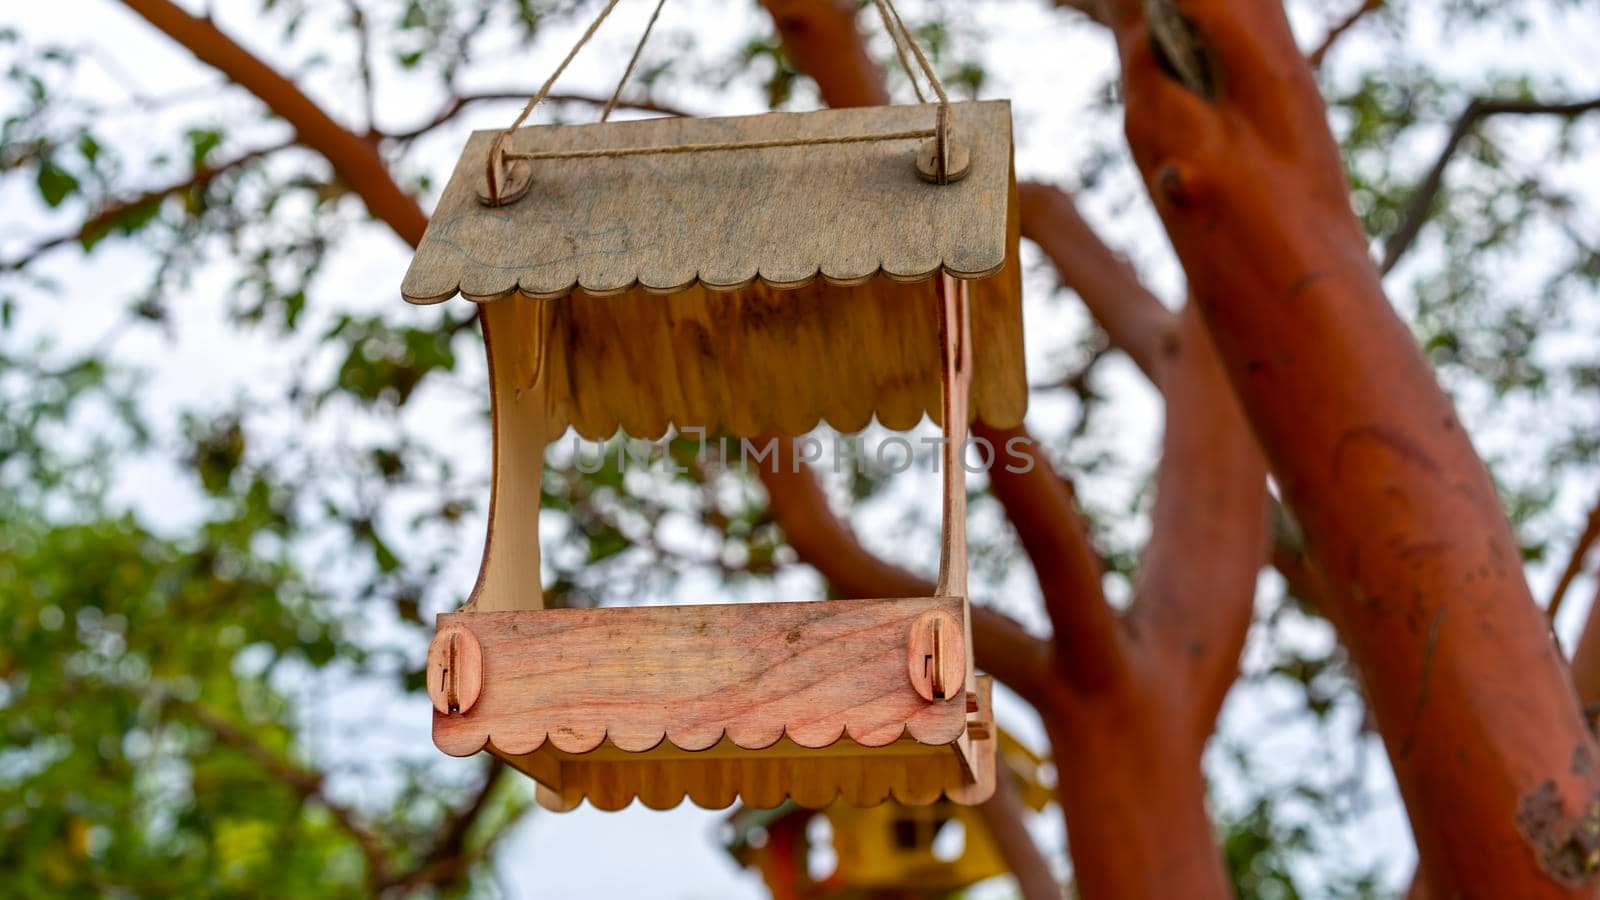 Wooden bird feeders on a blurry background of trees.